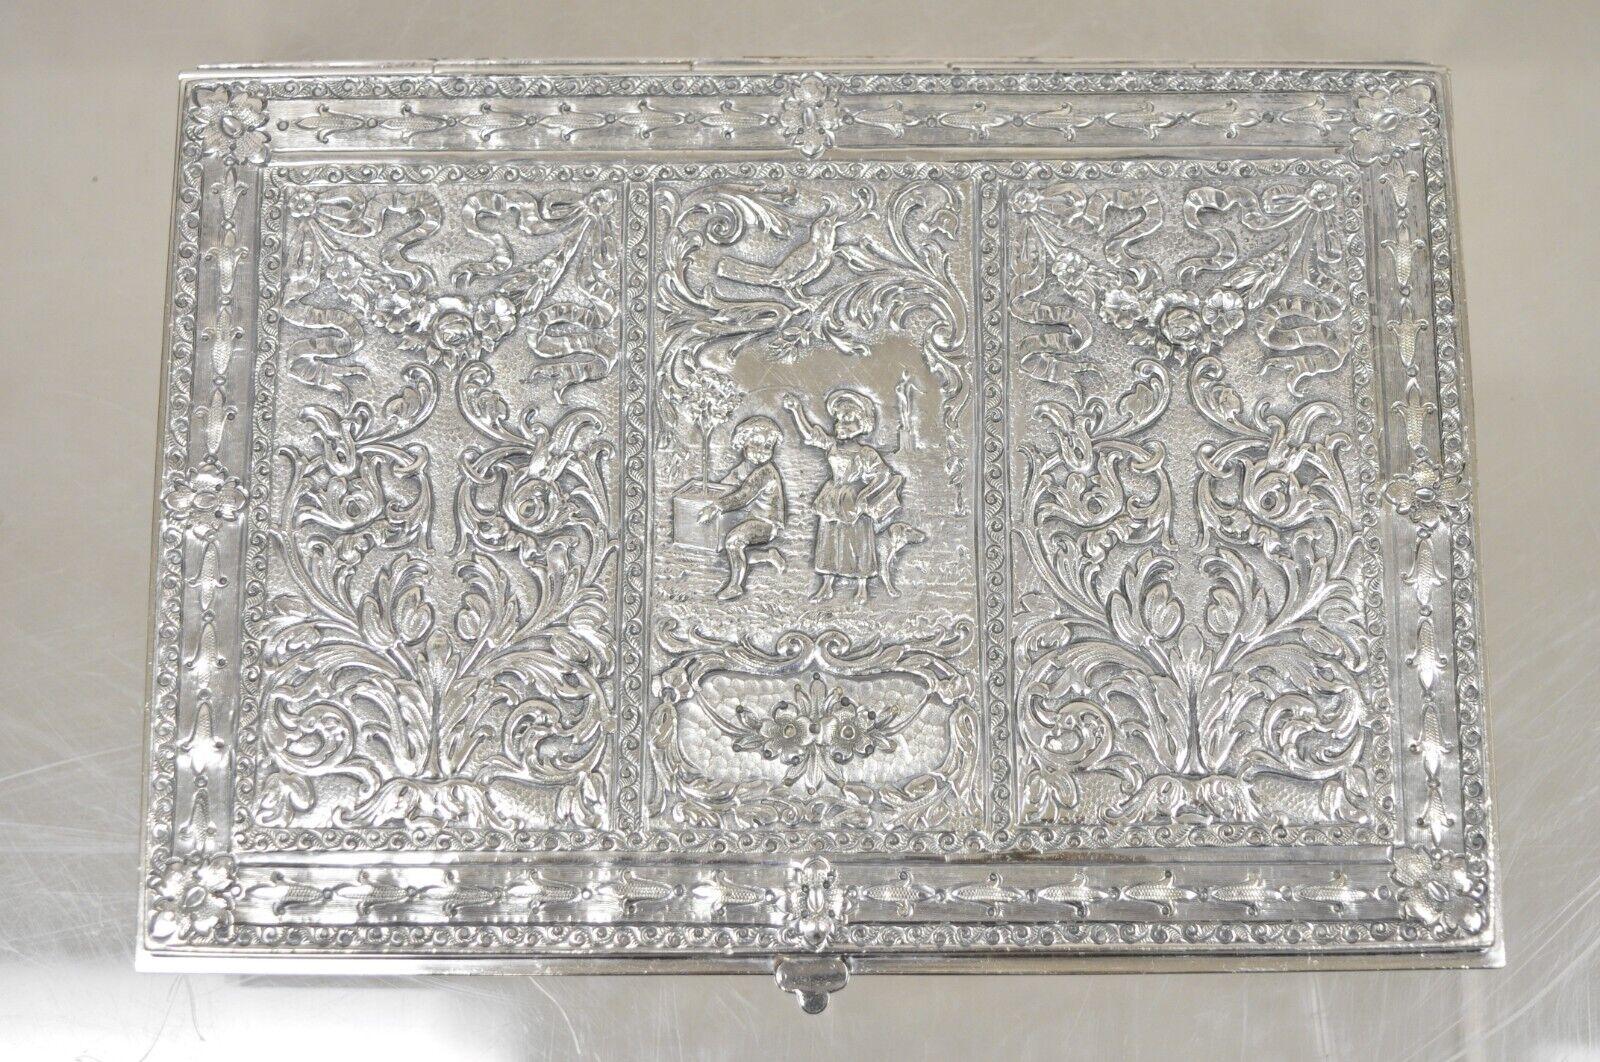 Vintage Dutch Country French Baroque Style Silver Plated Figural Jewelry Box. Circa Early 1900s. Measurements:  1.5